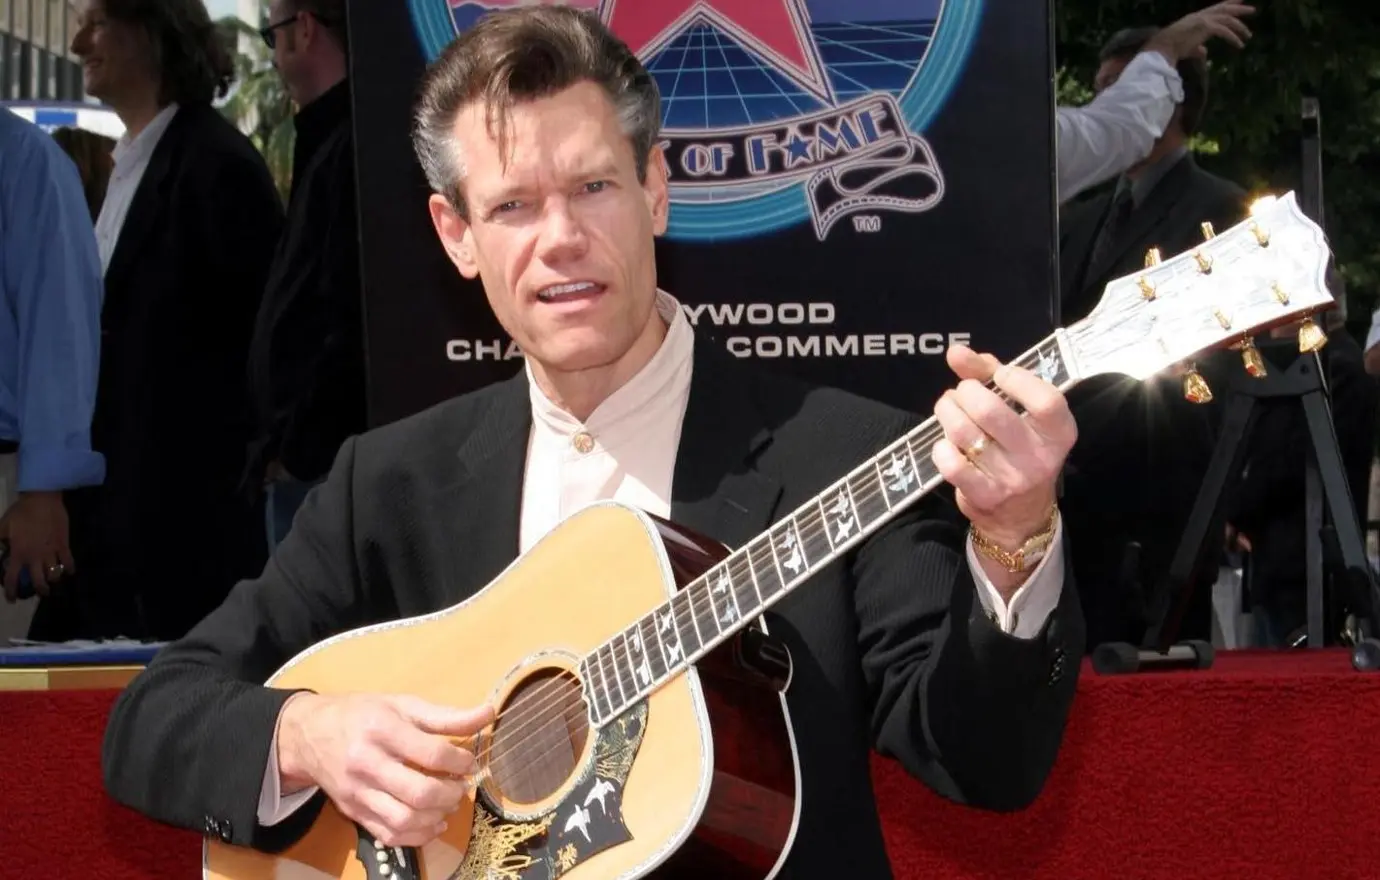 Where is Randy Travis in 2022? Why a country music star's incredible recuperation